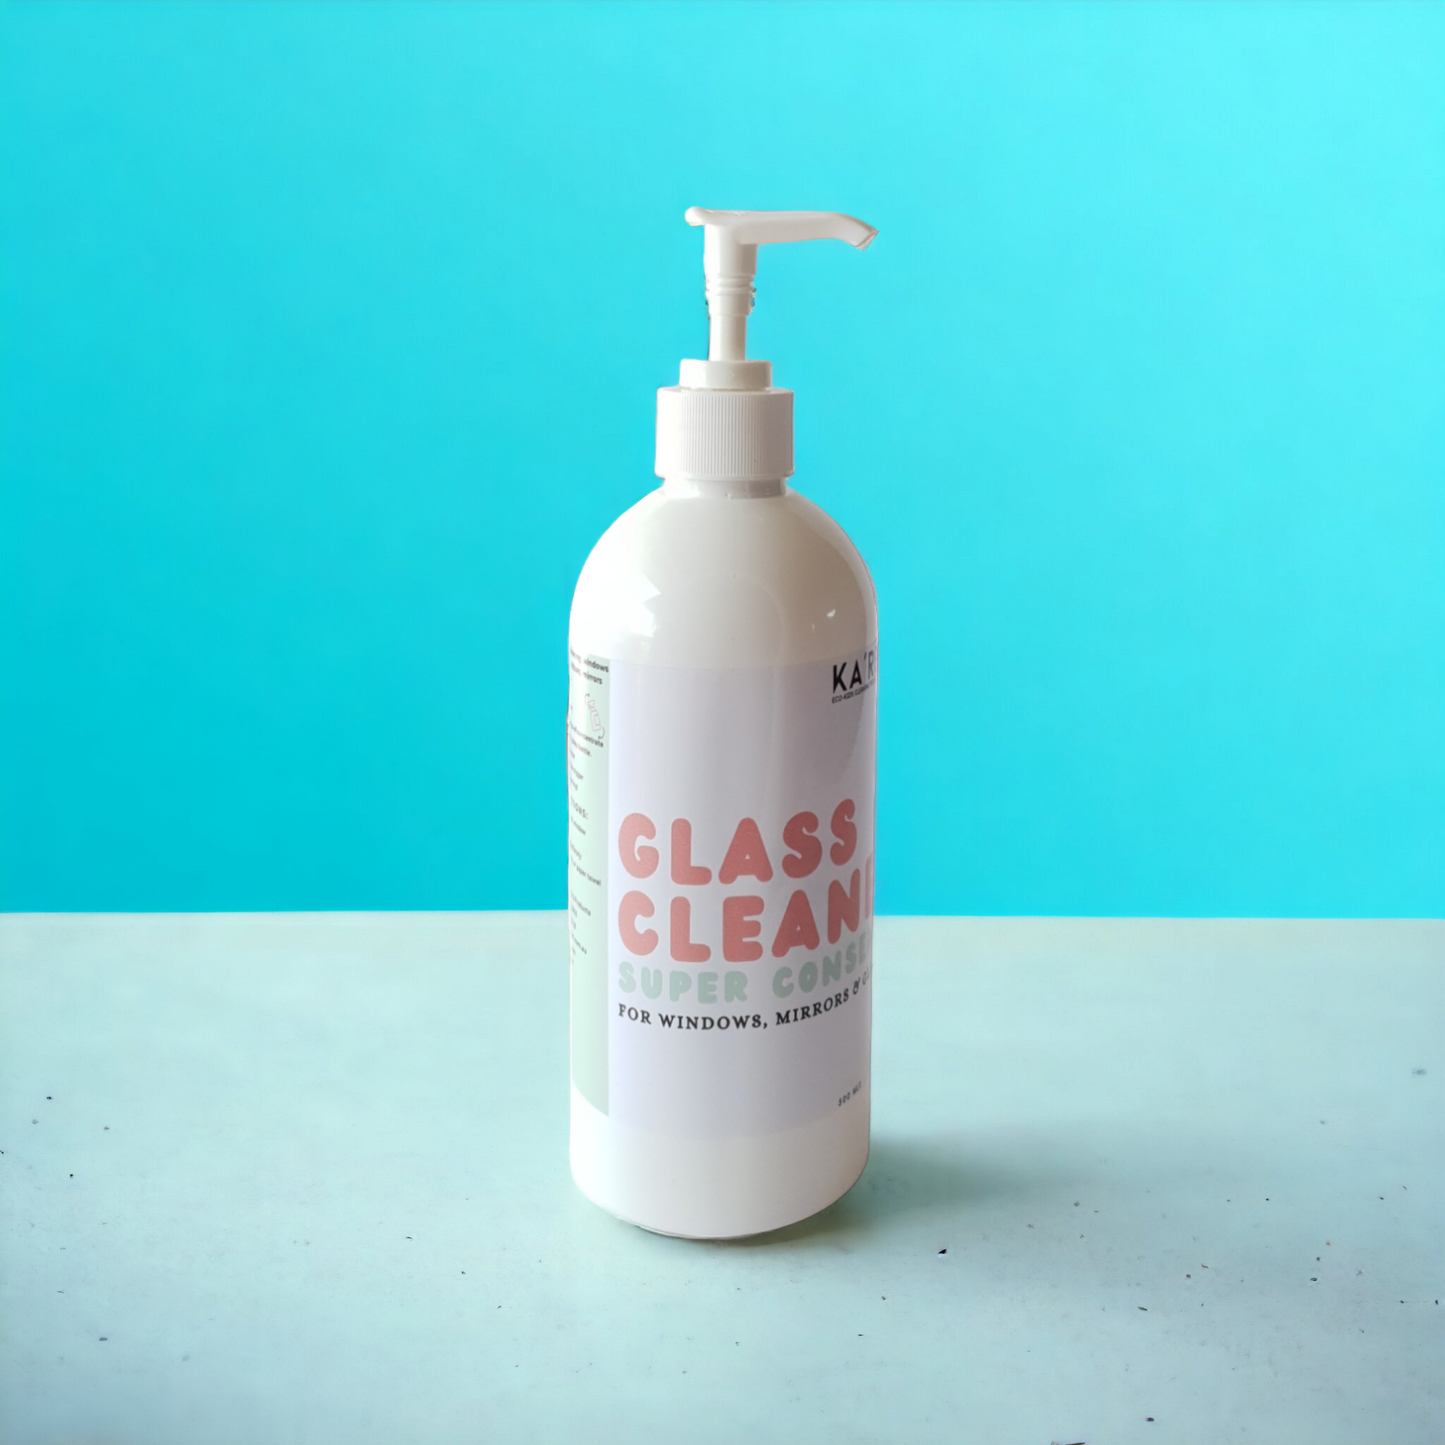 Glass Cleaner Super Concentrate